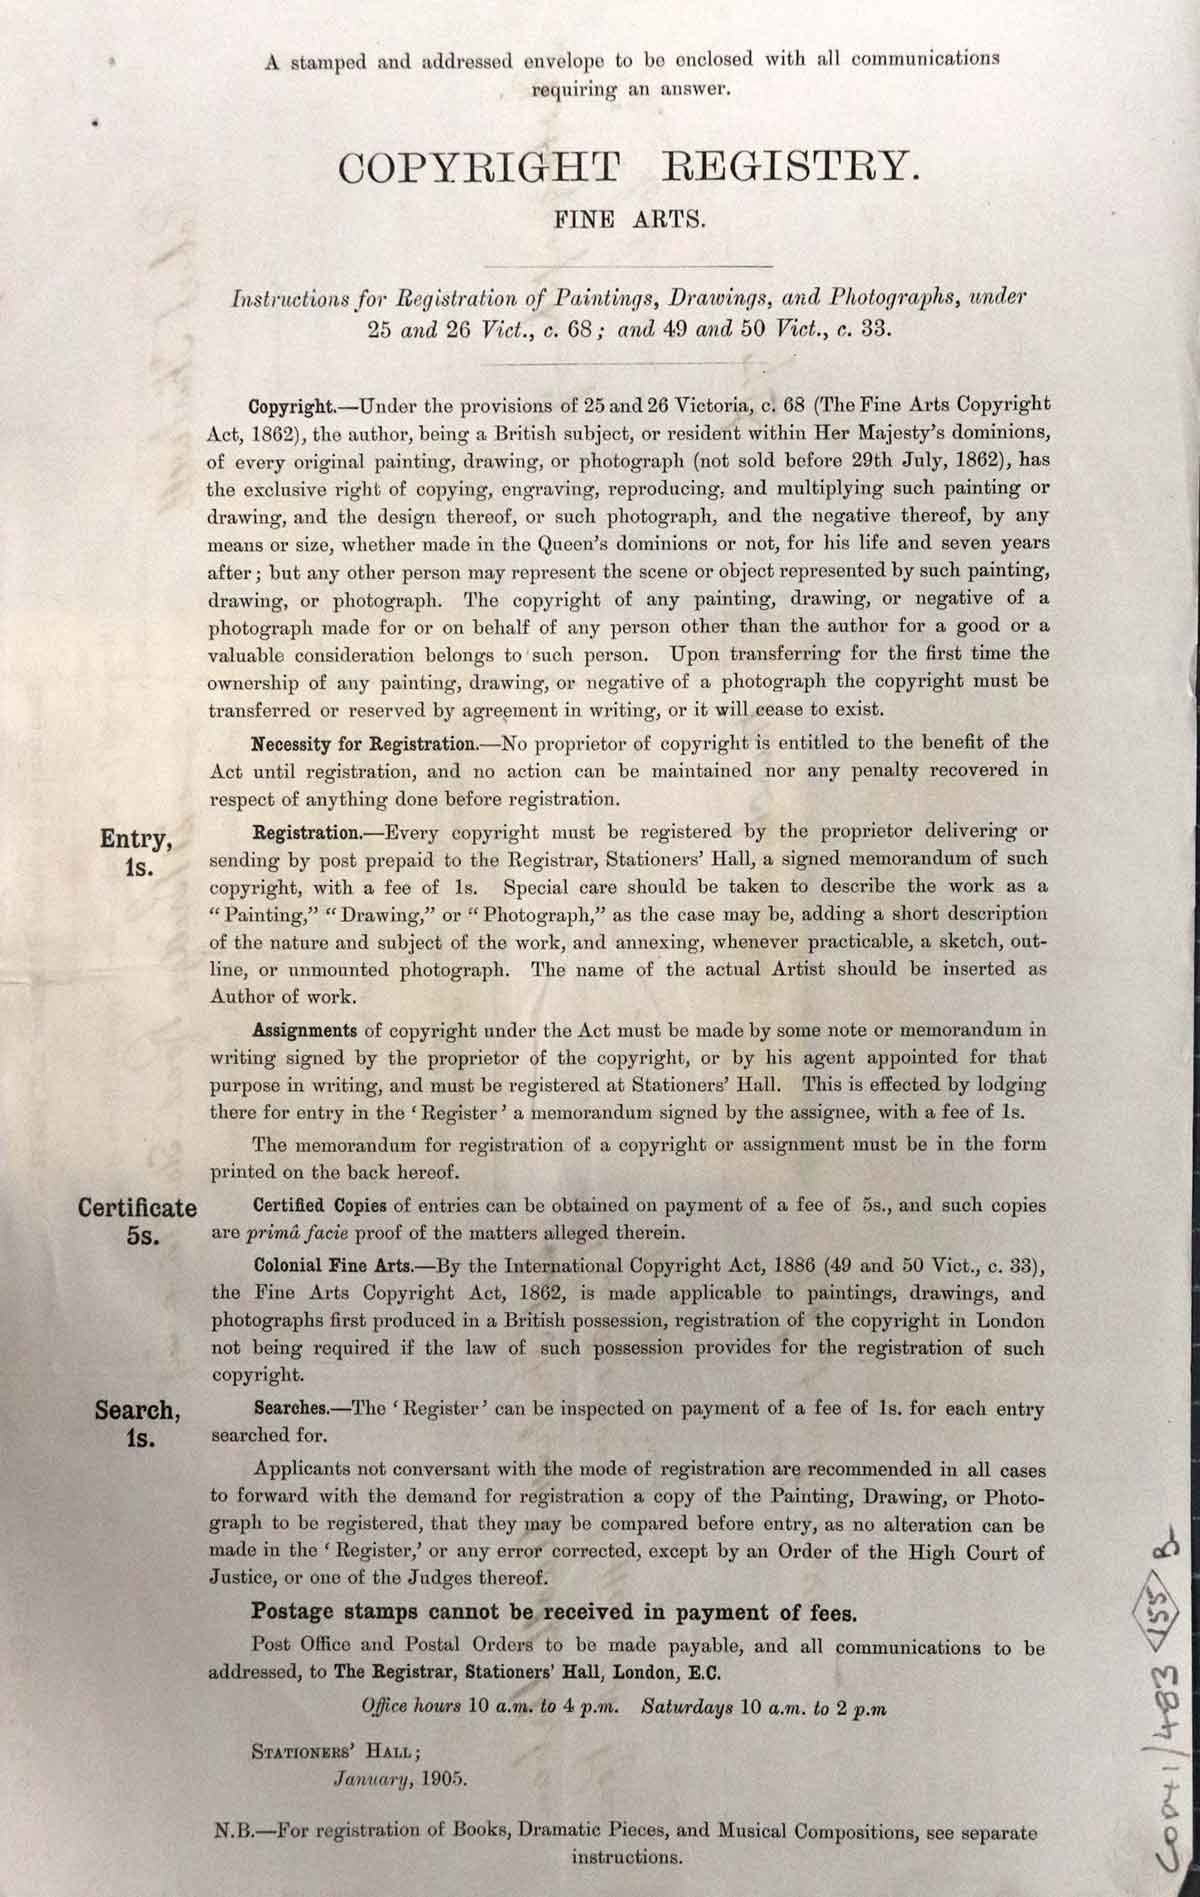 A printed document of dense text giving detailed information about copyright registration